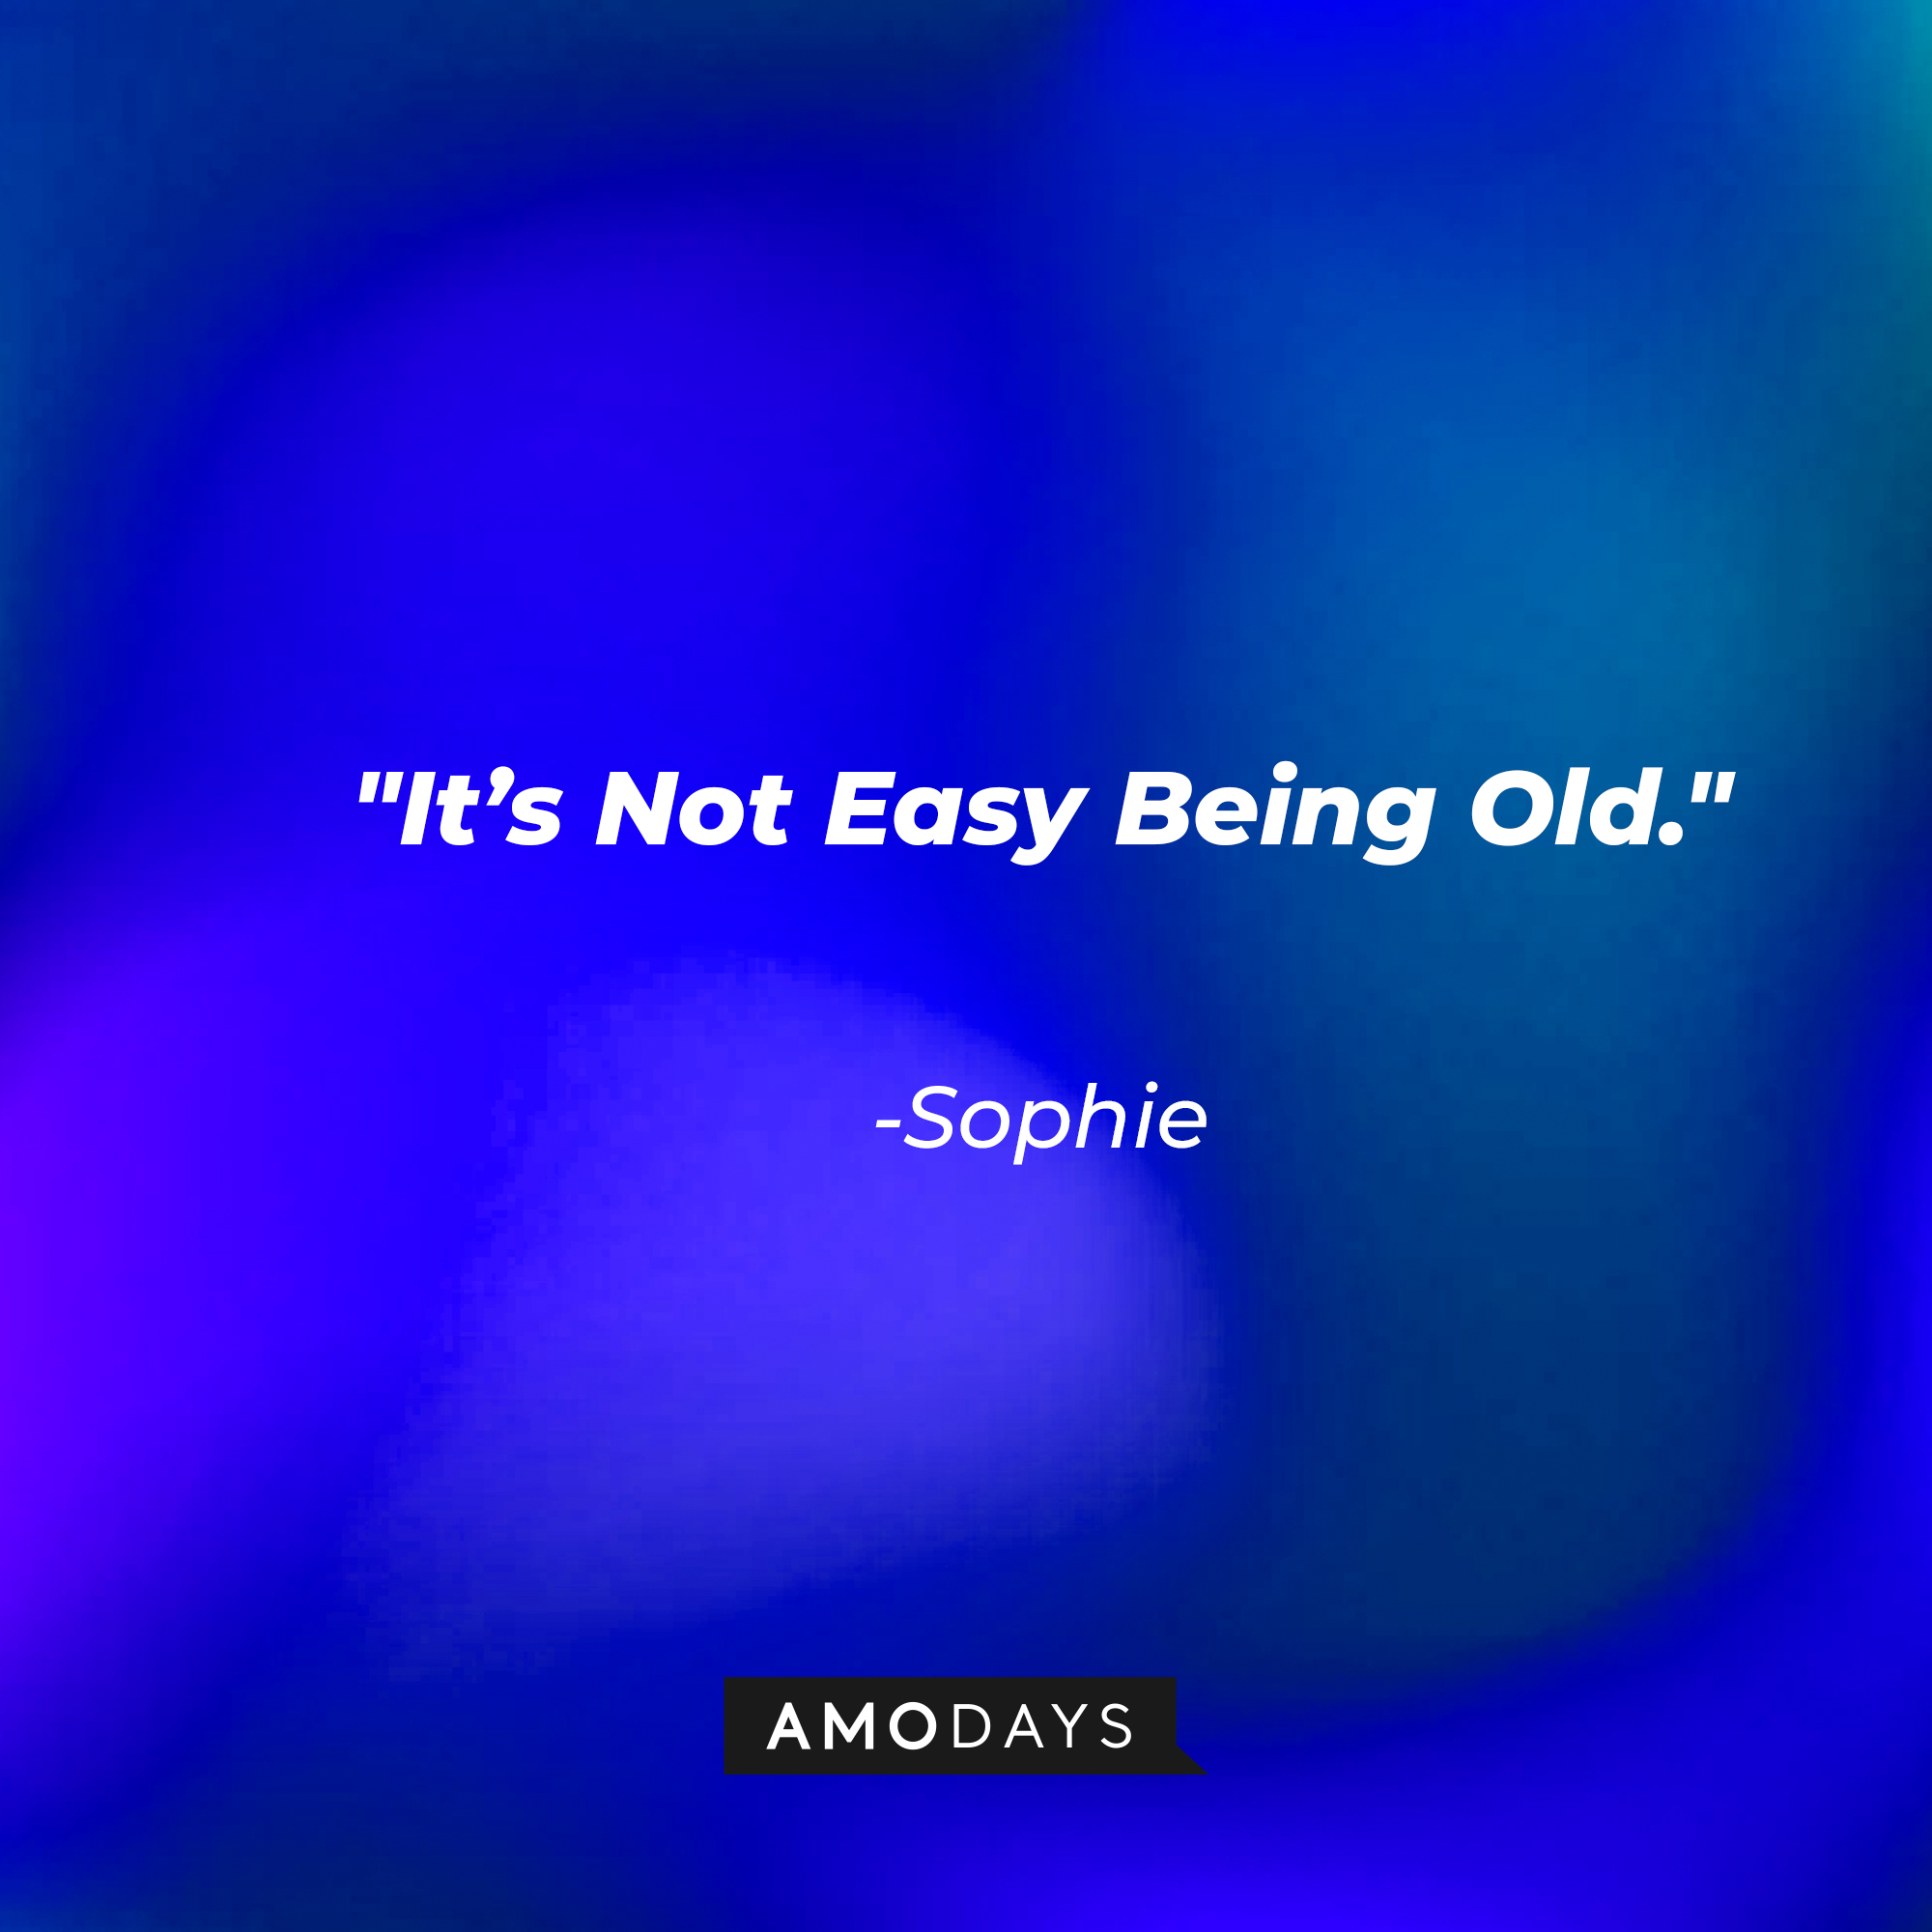 Sophie's quote: "It's Not Easy Being Old." | Source: Amodays